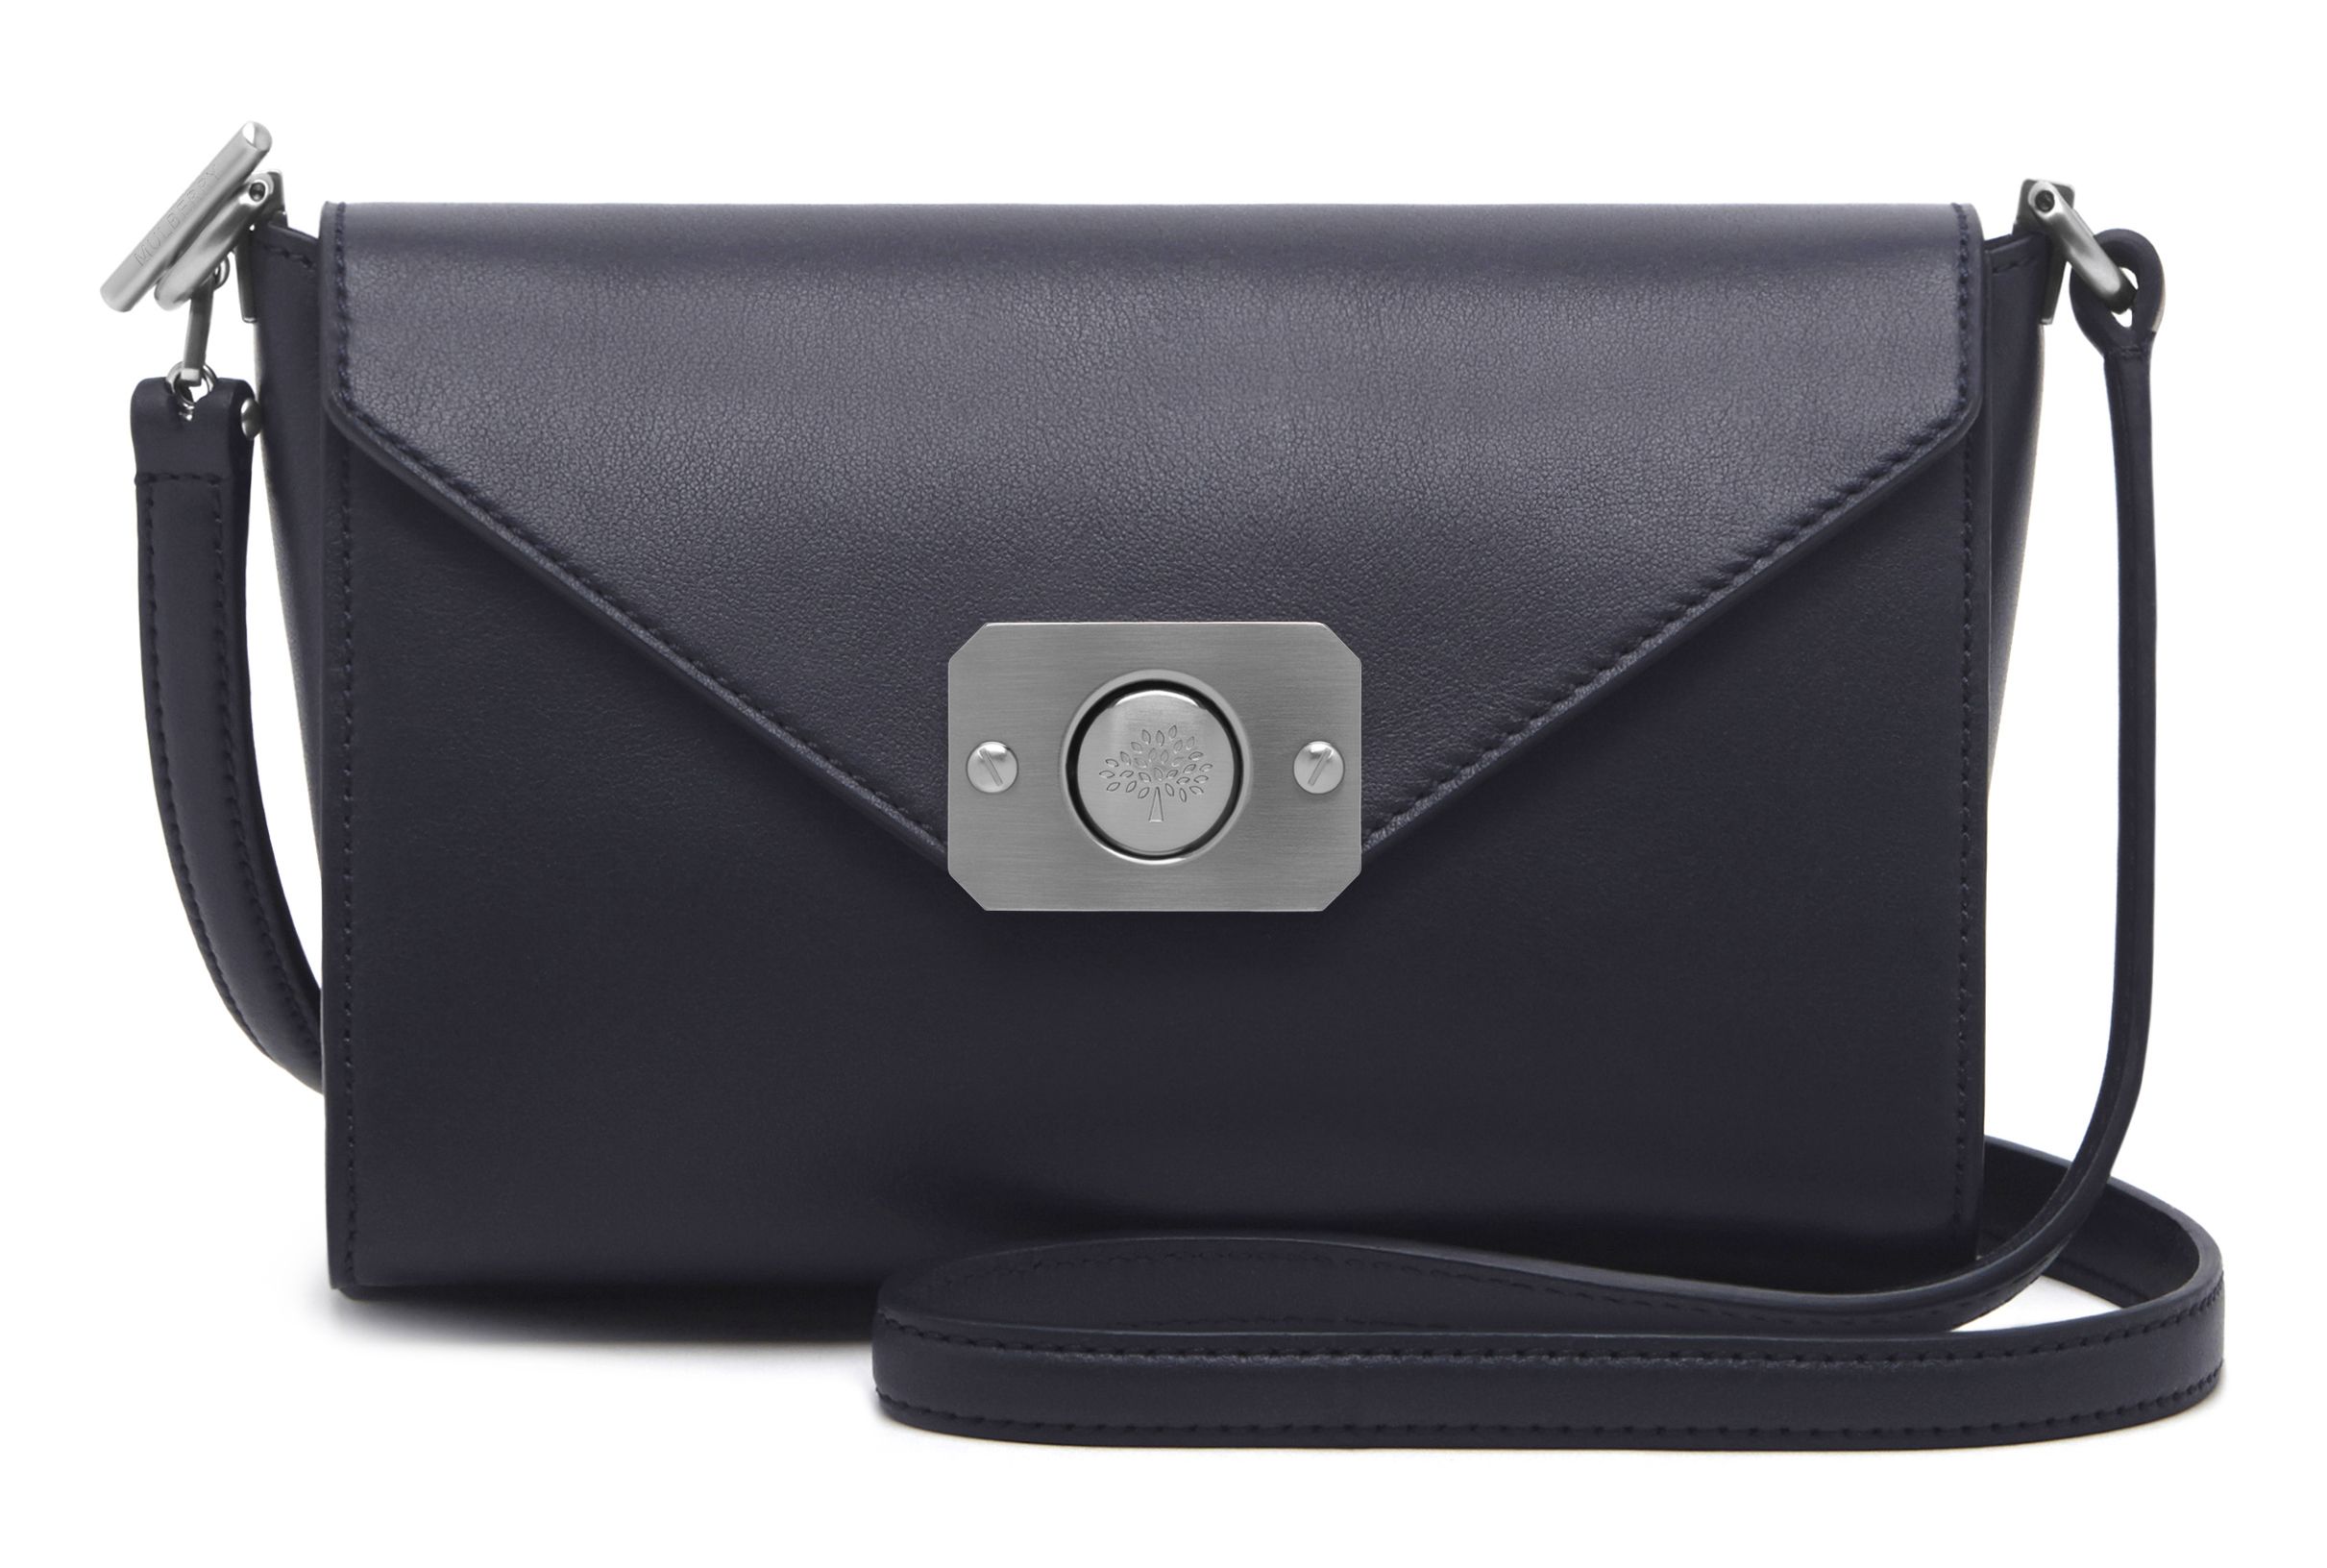 Delphine in Black Rustic is a chic 70's answer to an everyday bag